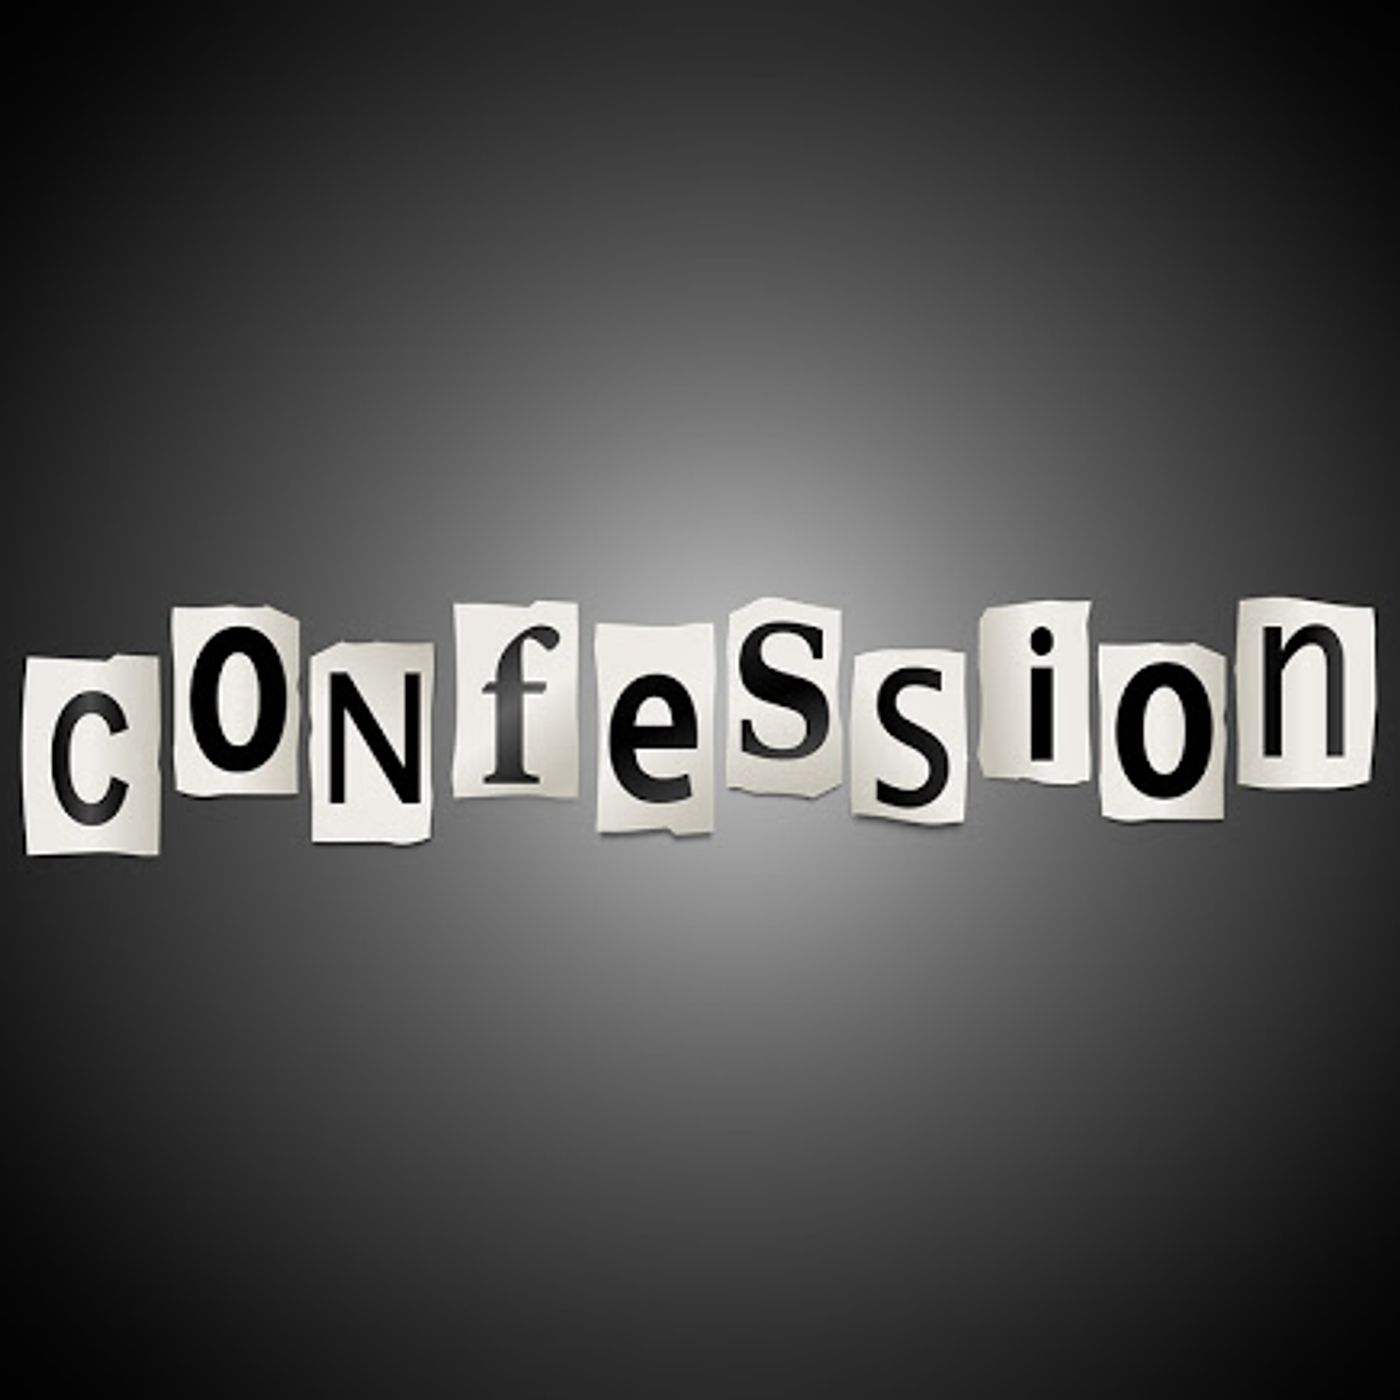 Ep. 13 - What Does It Mean to Confess? What is it?